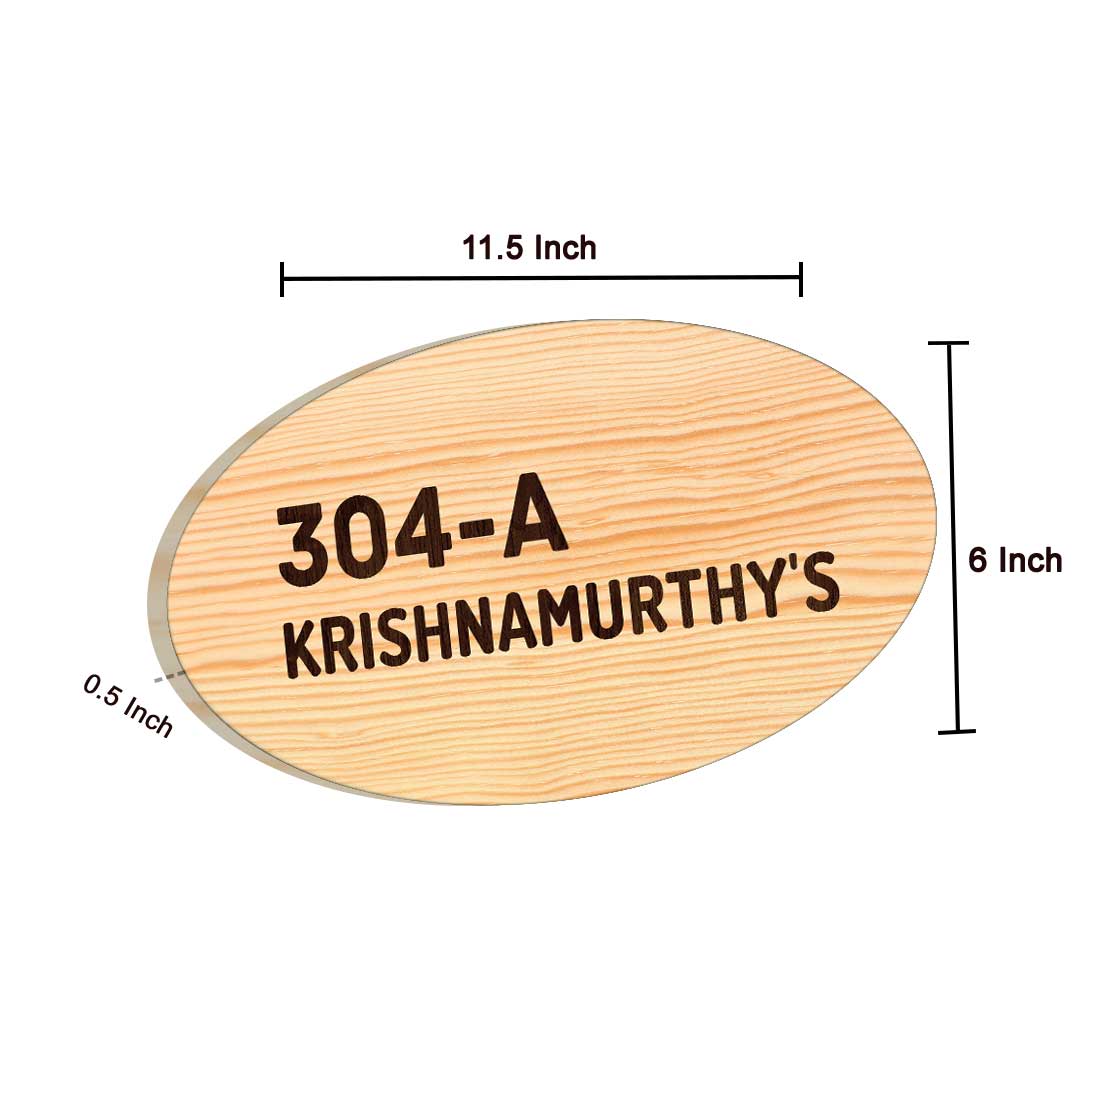 Customized Wooden Name Plate for Flat Bungalow